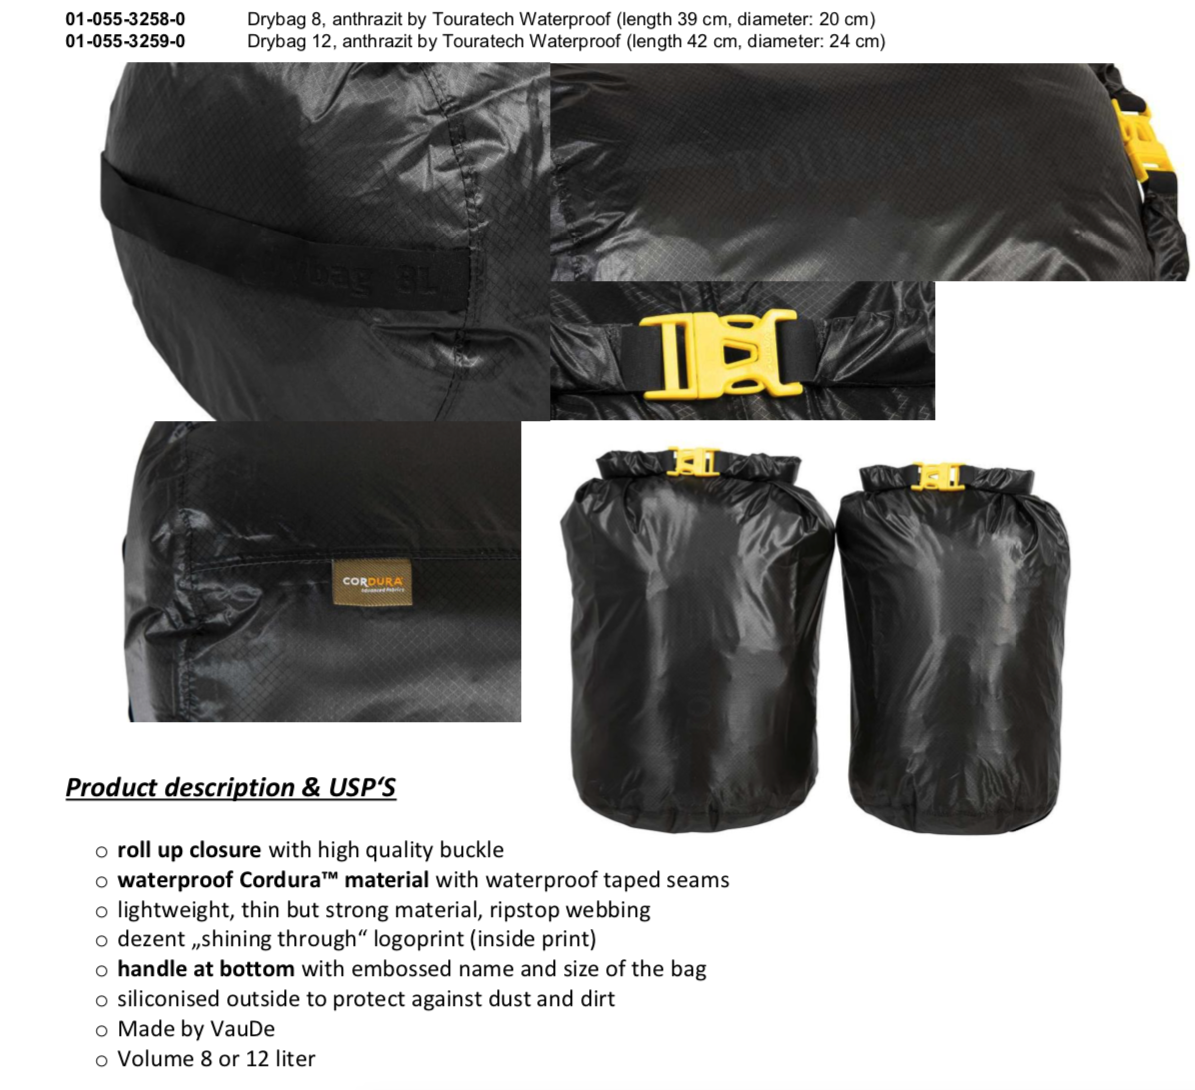 Drybag 8, anthrazit by Touratech Waterproof